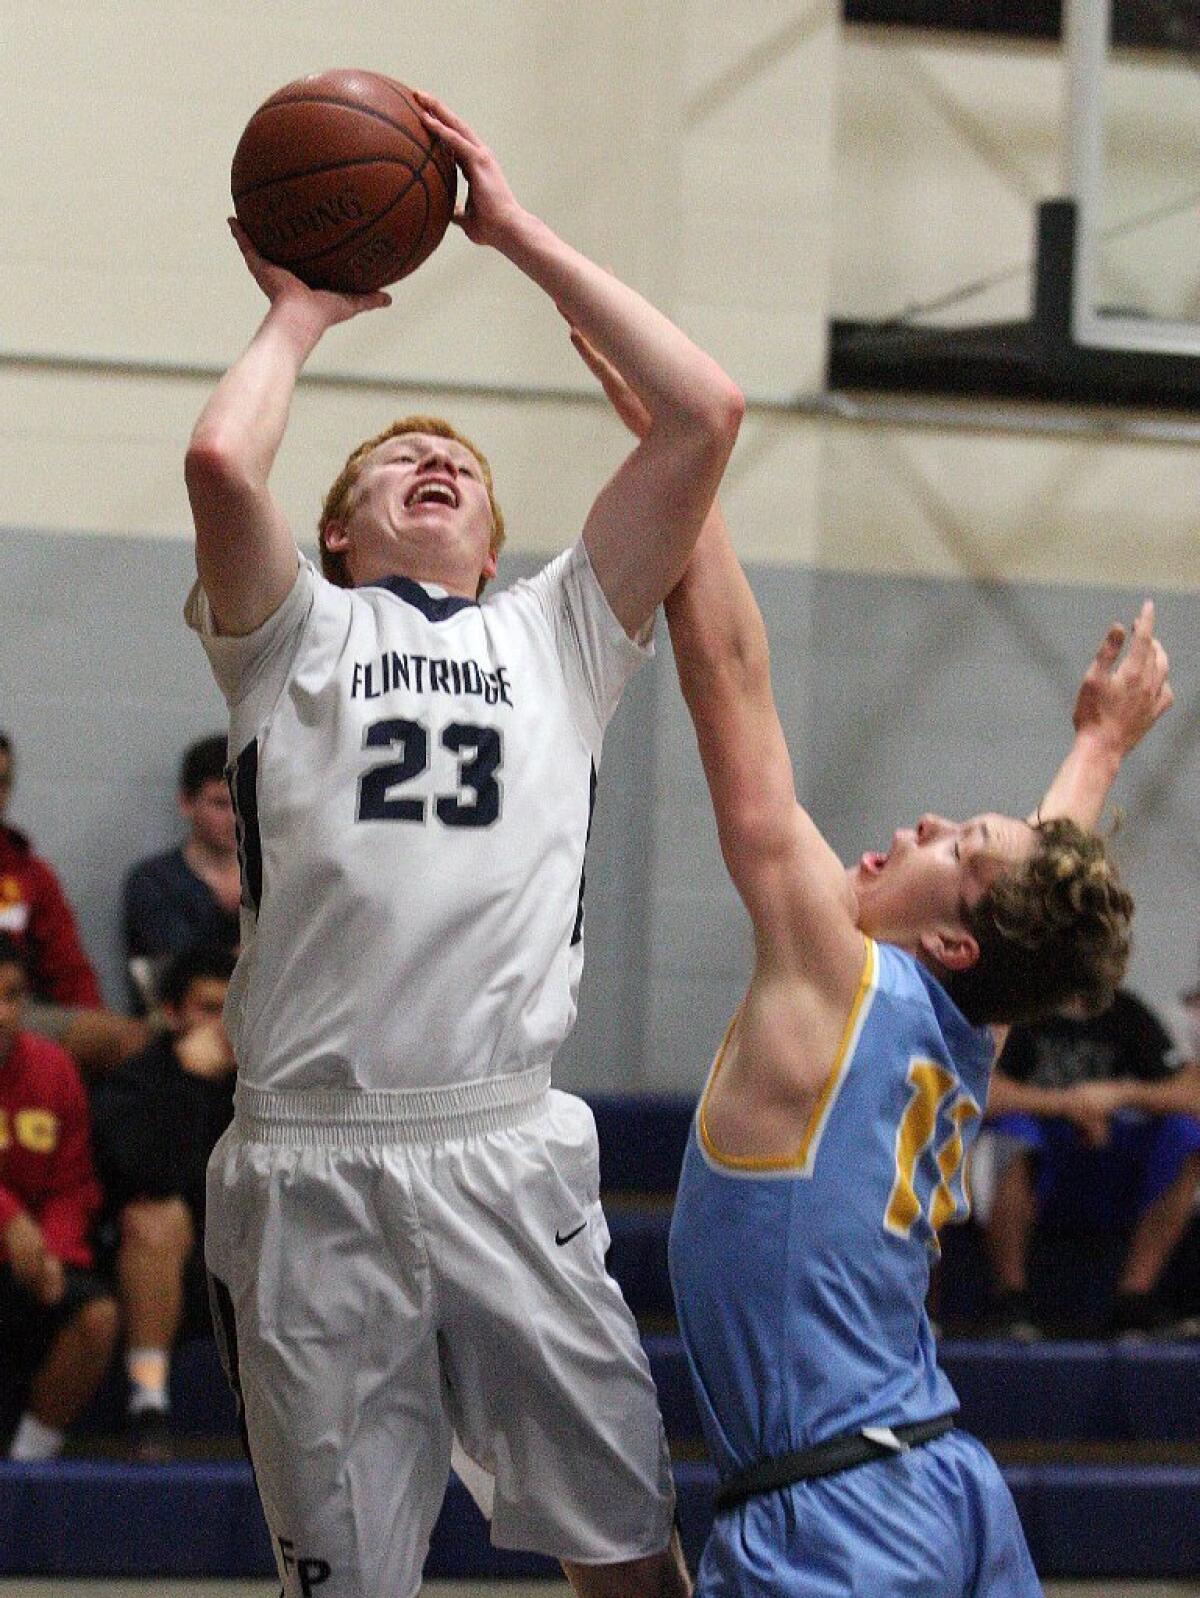 Jake Althouse and the Flintridge Prep boys' basketball team earned a CIF first-round win over Quartz Hill on Wednesday.